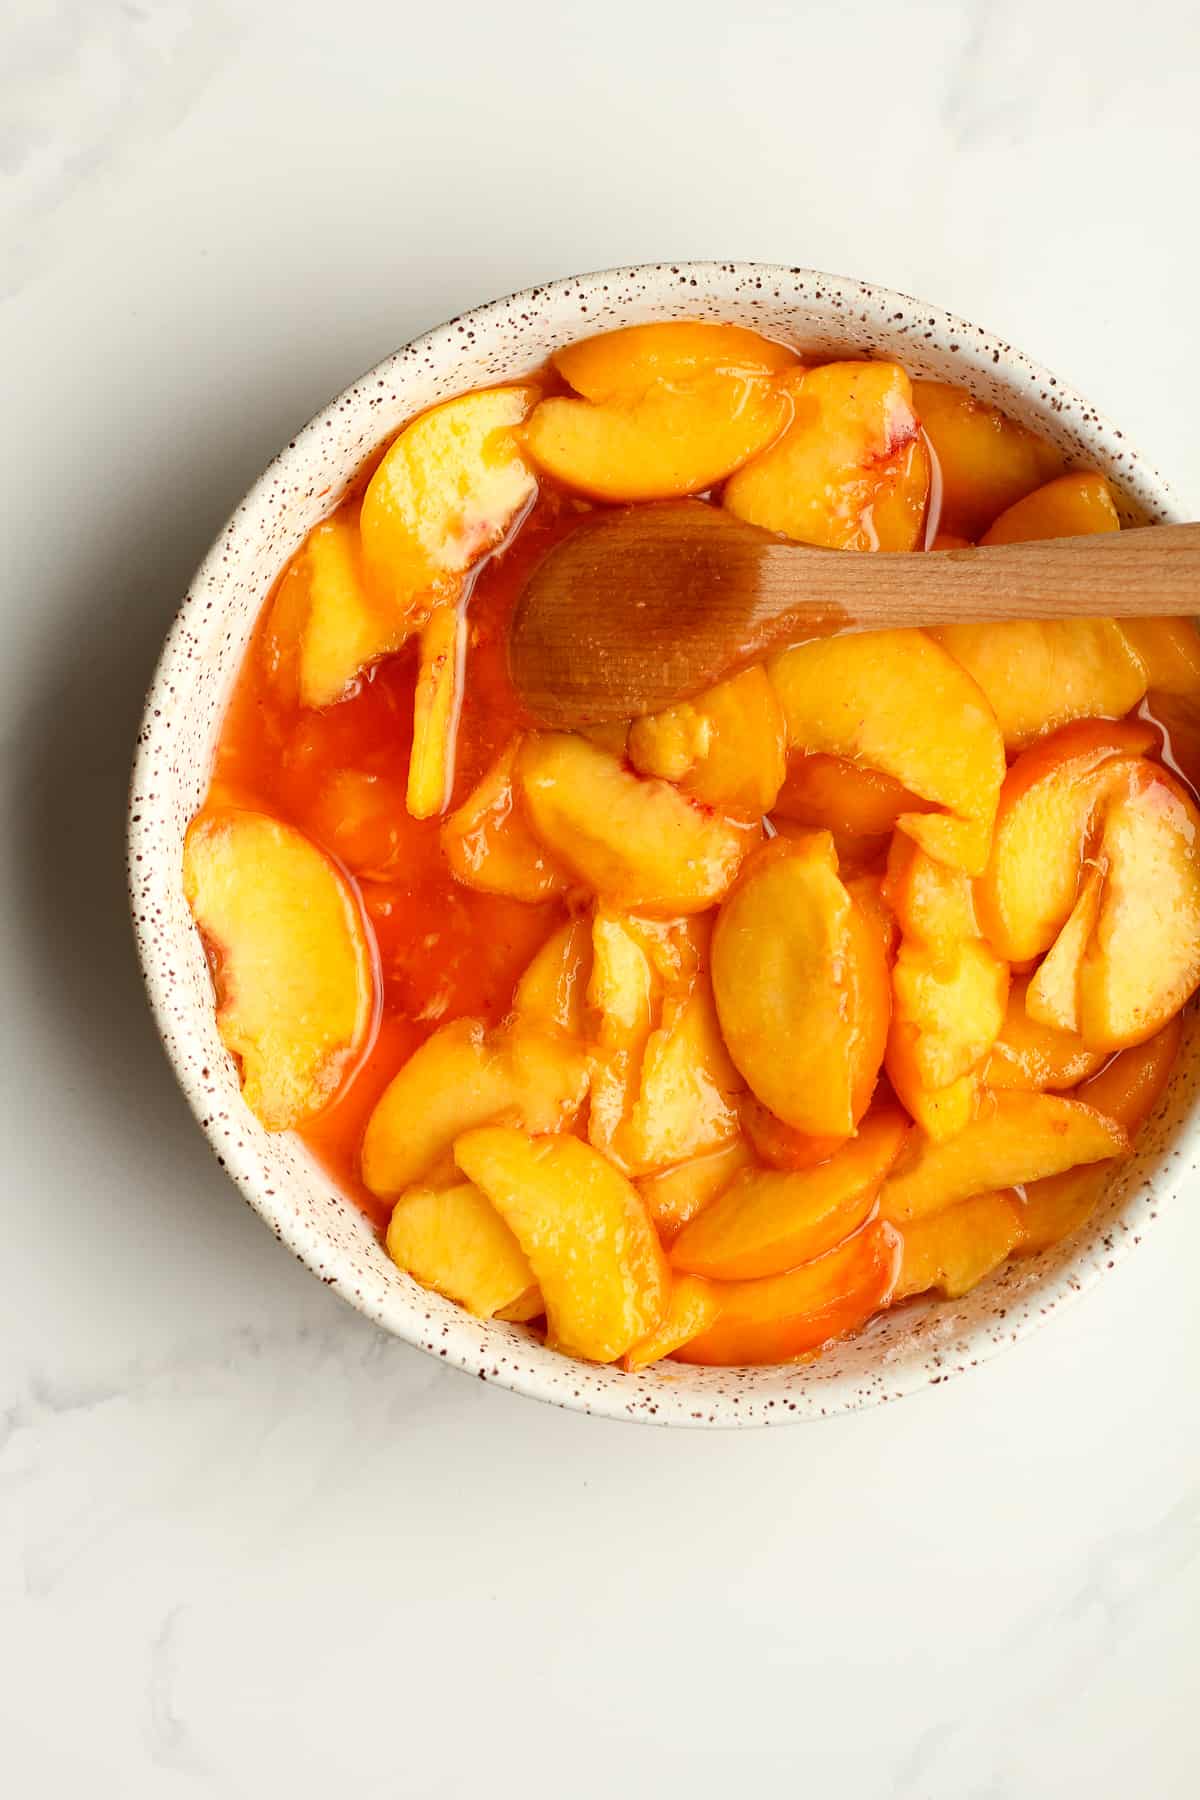 A bowl of peaches with juice.